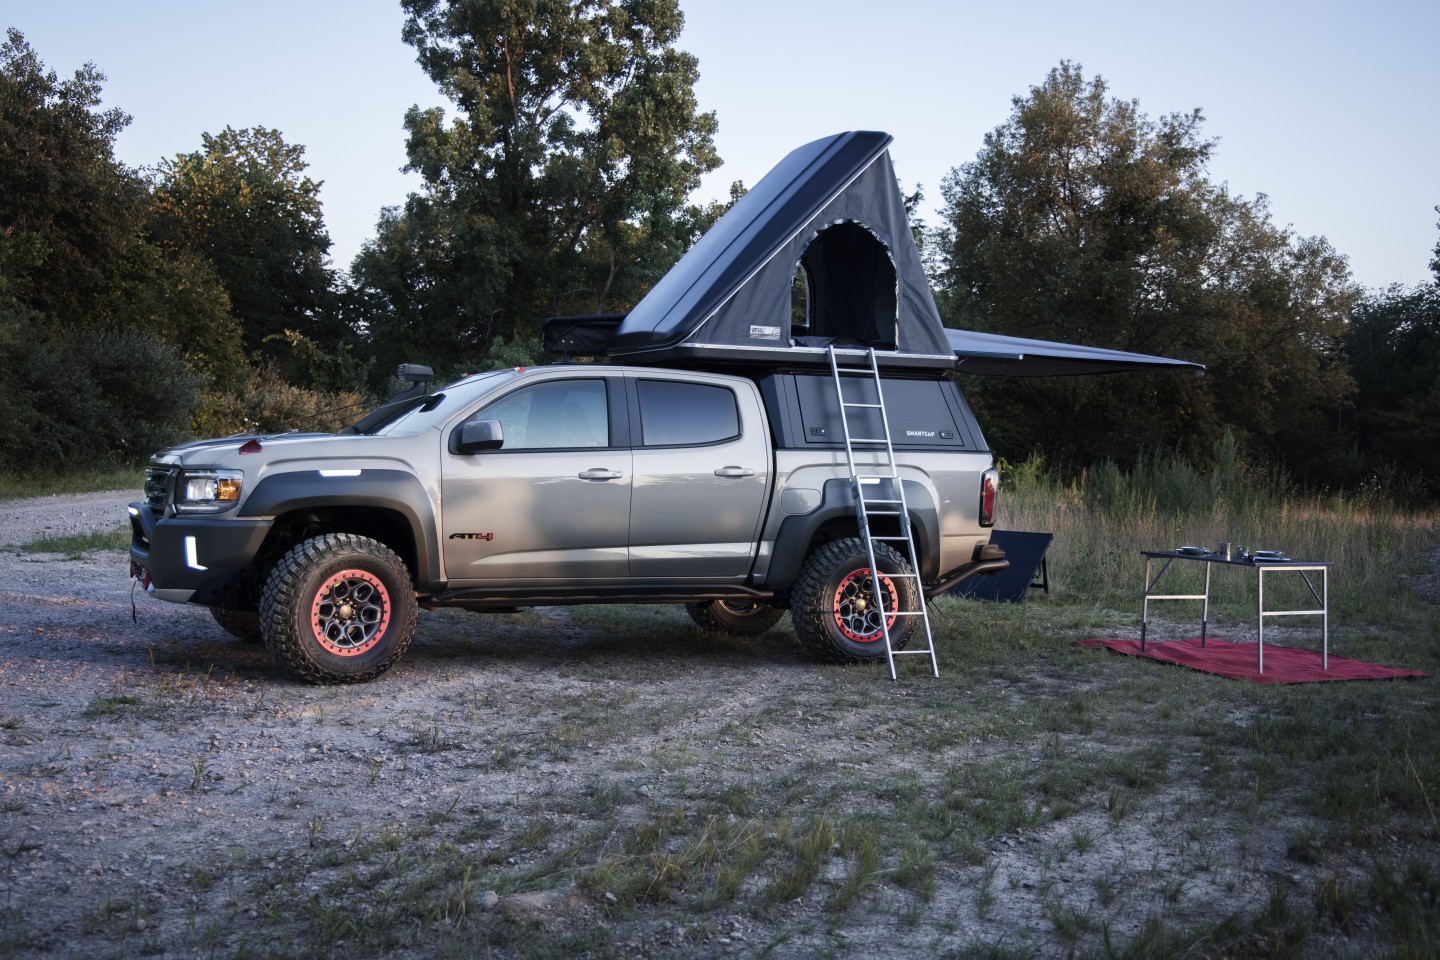 The popup rooftop tent and awning are part of the GMC Canyon AT4 OverlandX package on display at Overland Expo